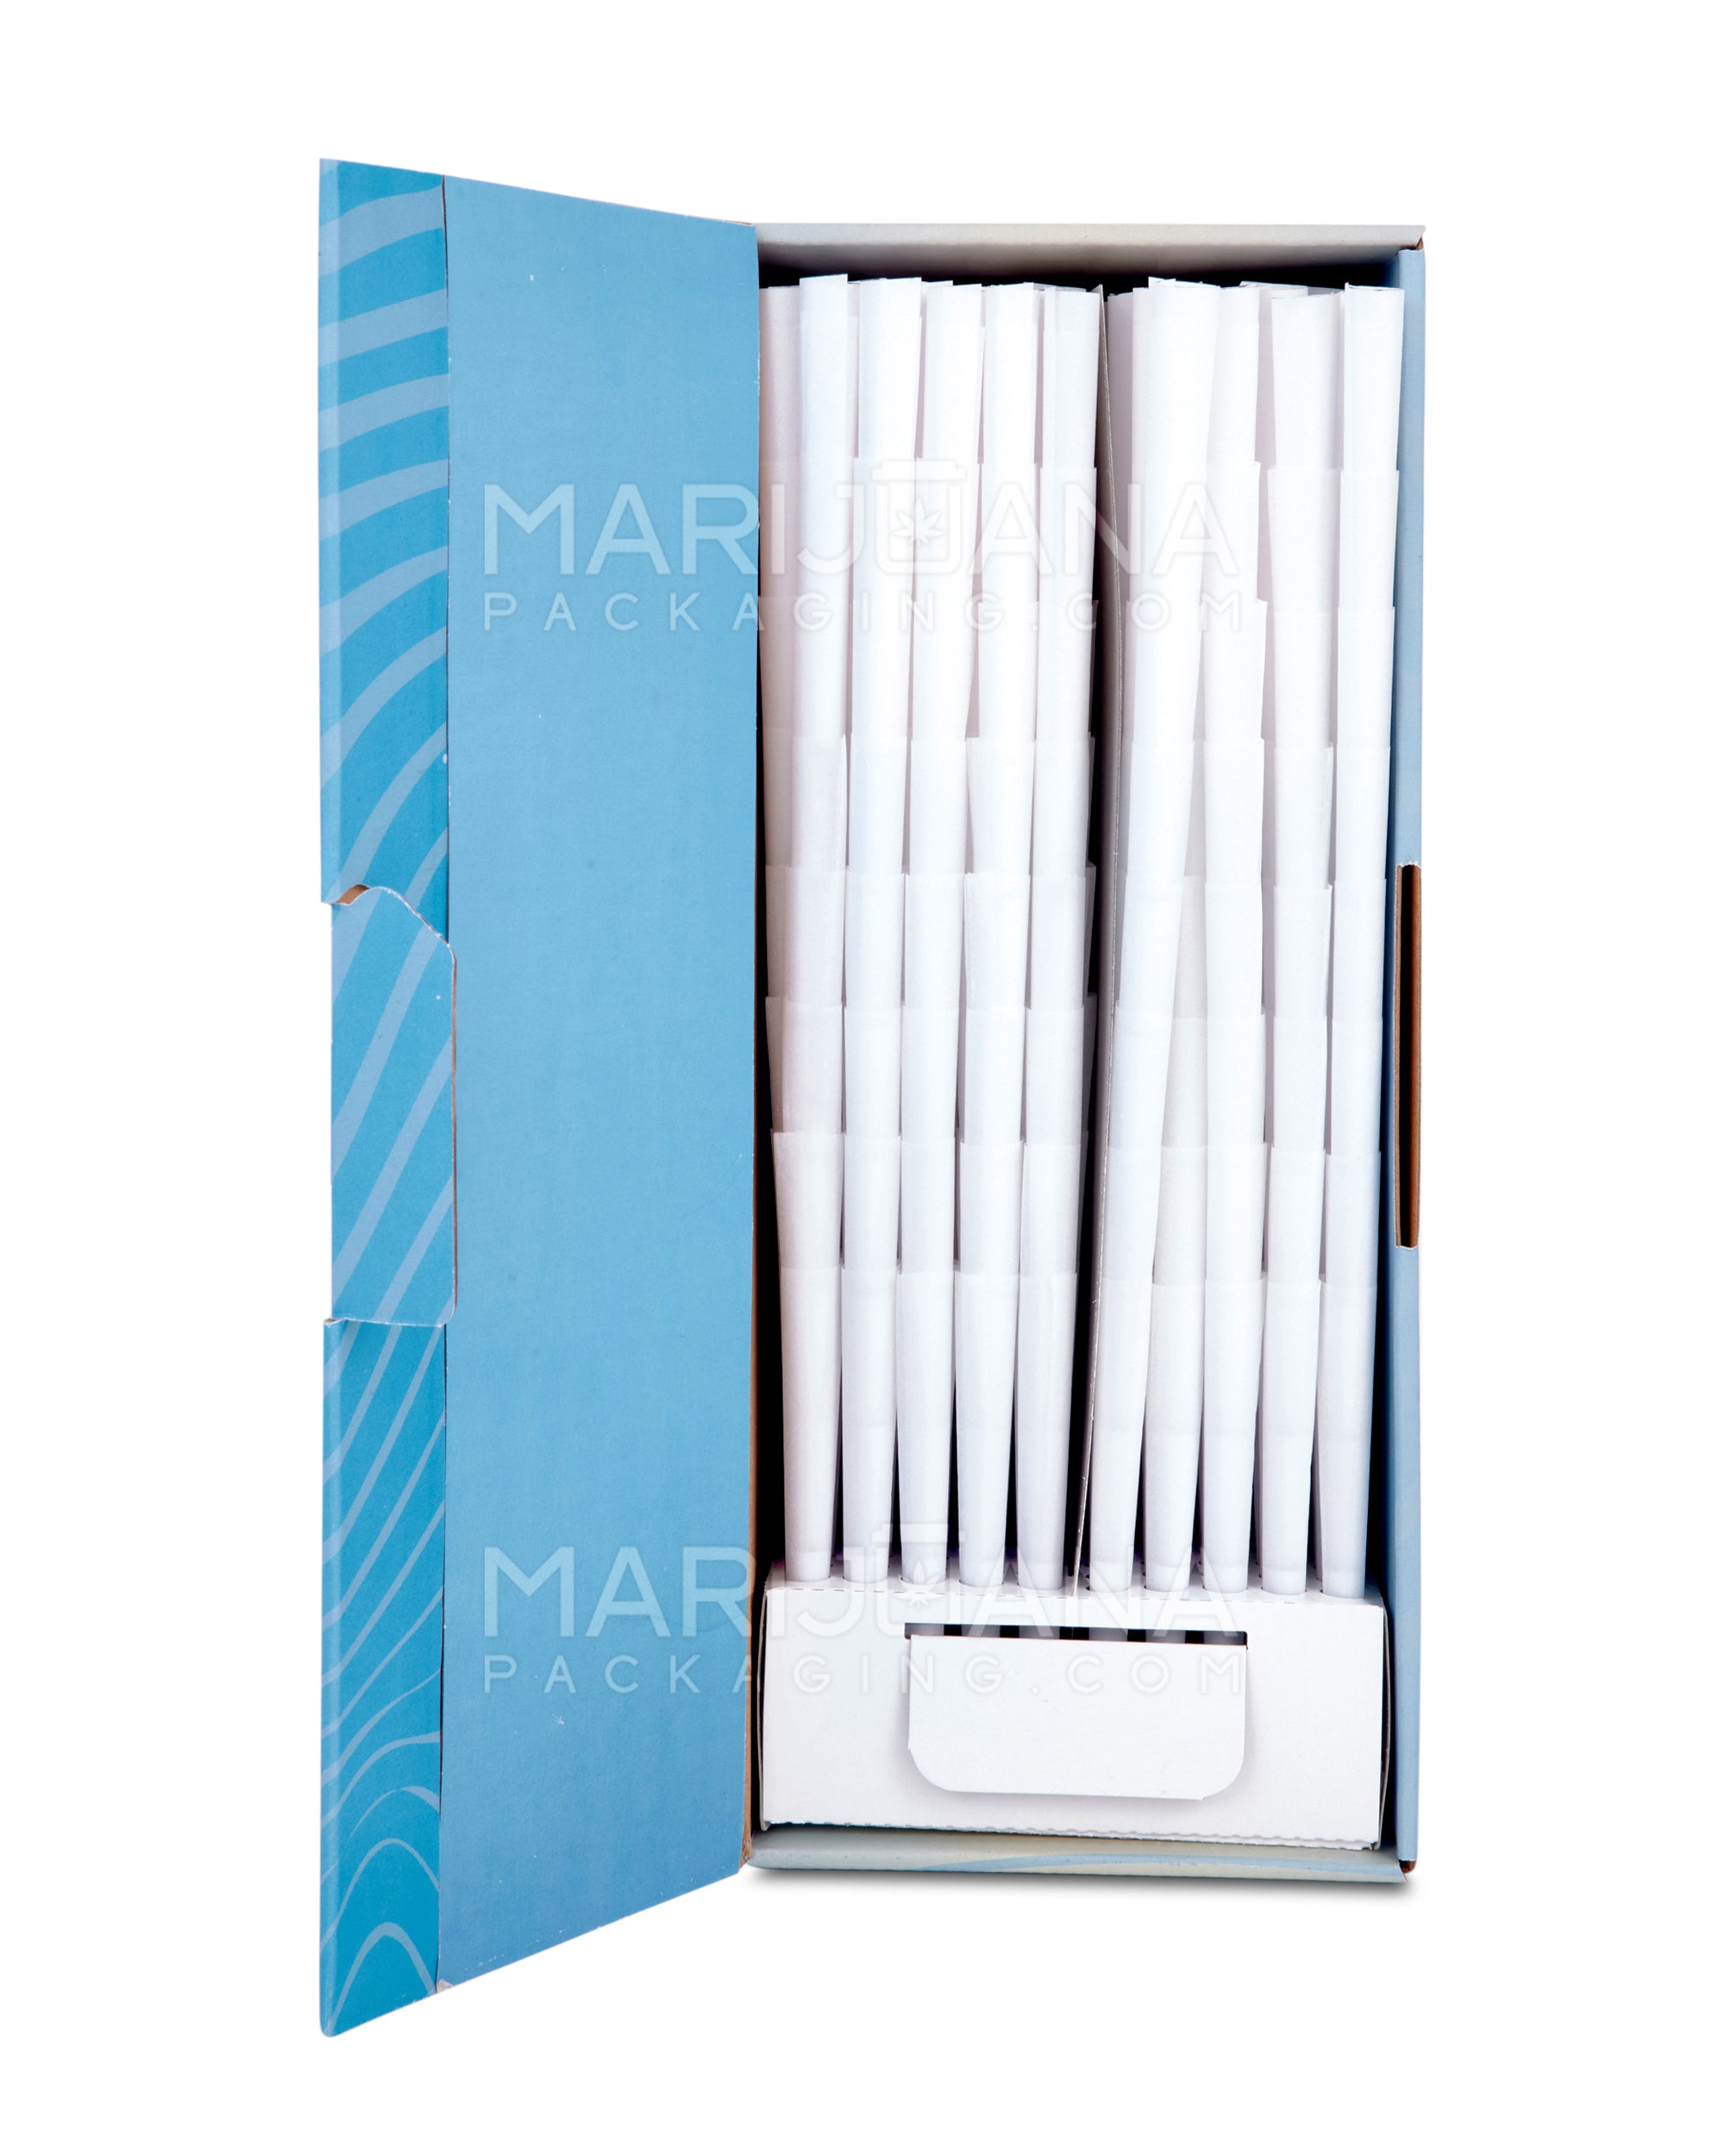 CONES + SUPPLY | King Size Pre-Rolled Cones | 109mm - Classic White Paper - 800 Count - 2